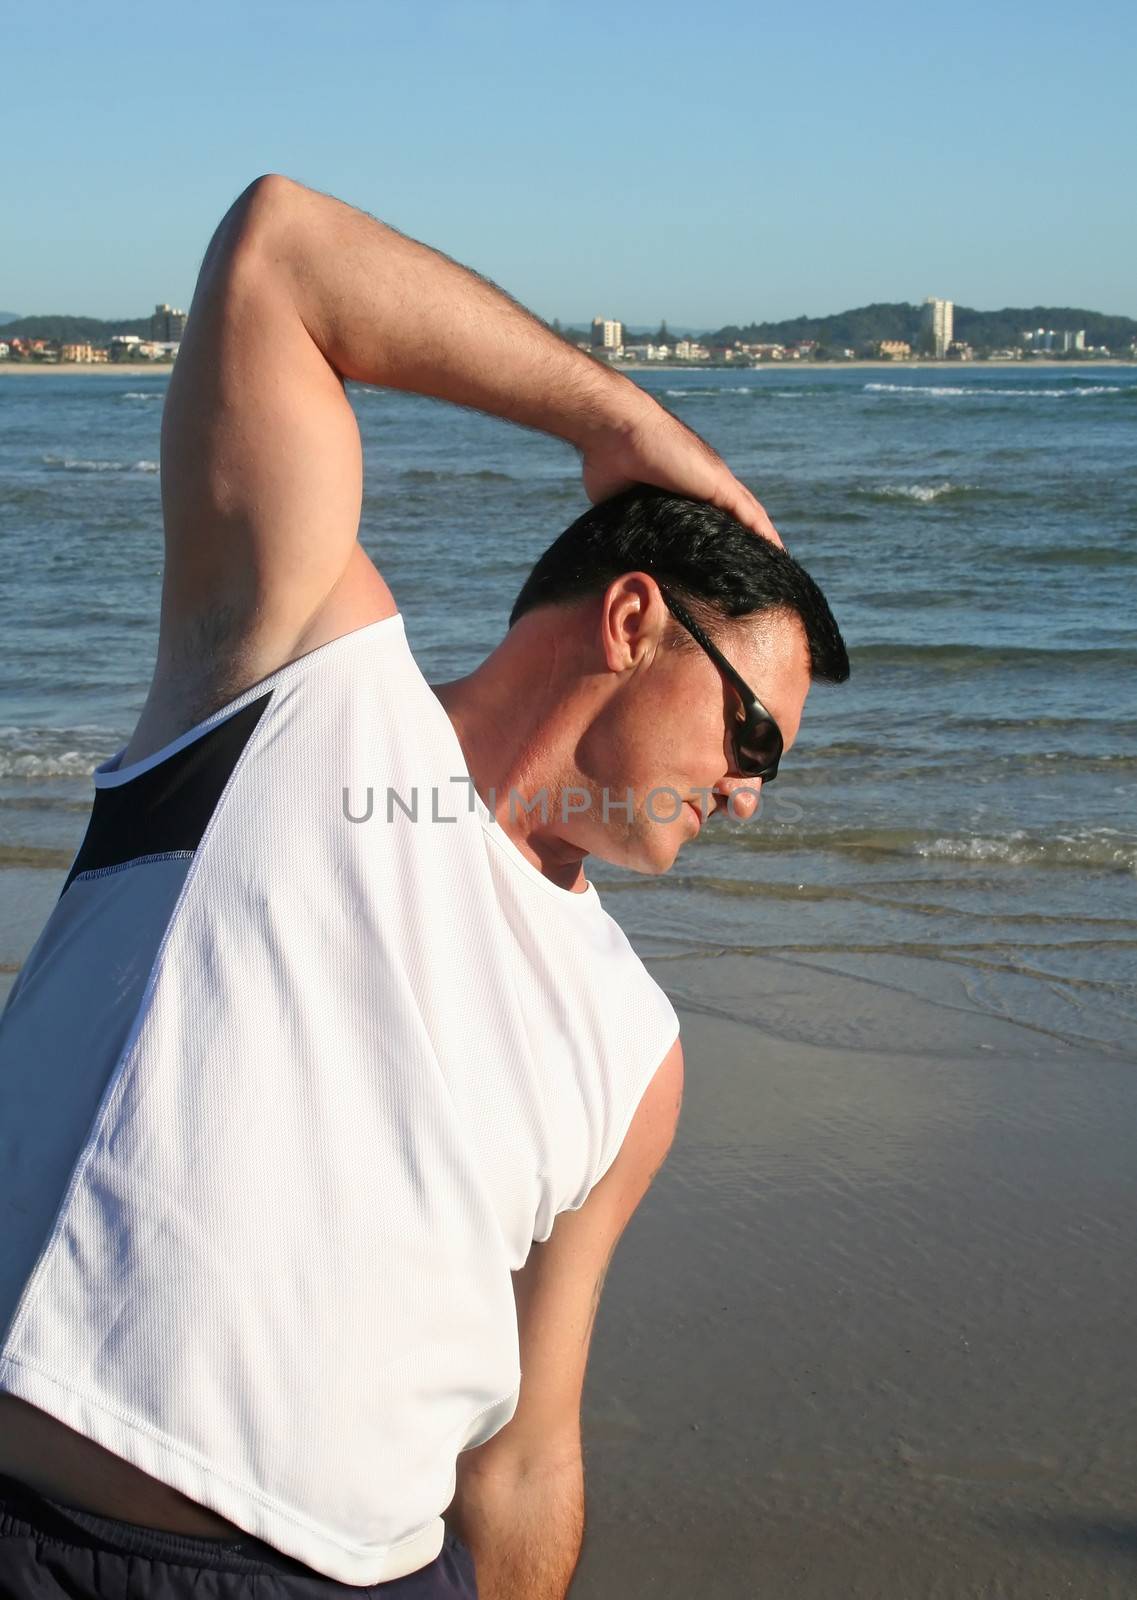 Man doing stretching exercises on the beach just after sunrise.